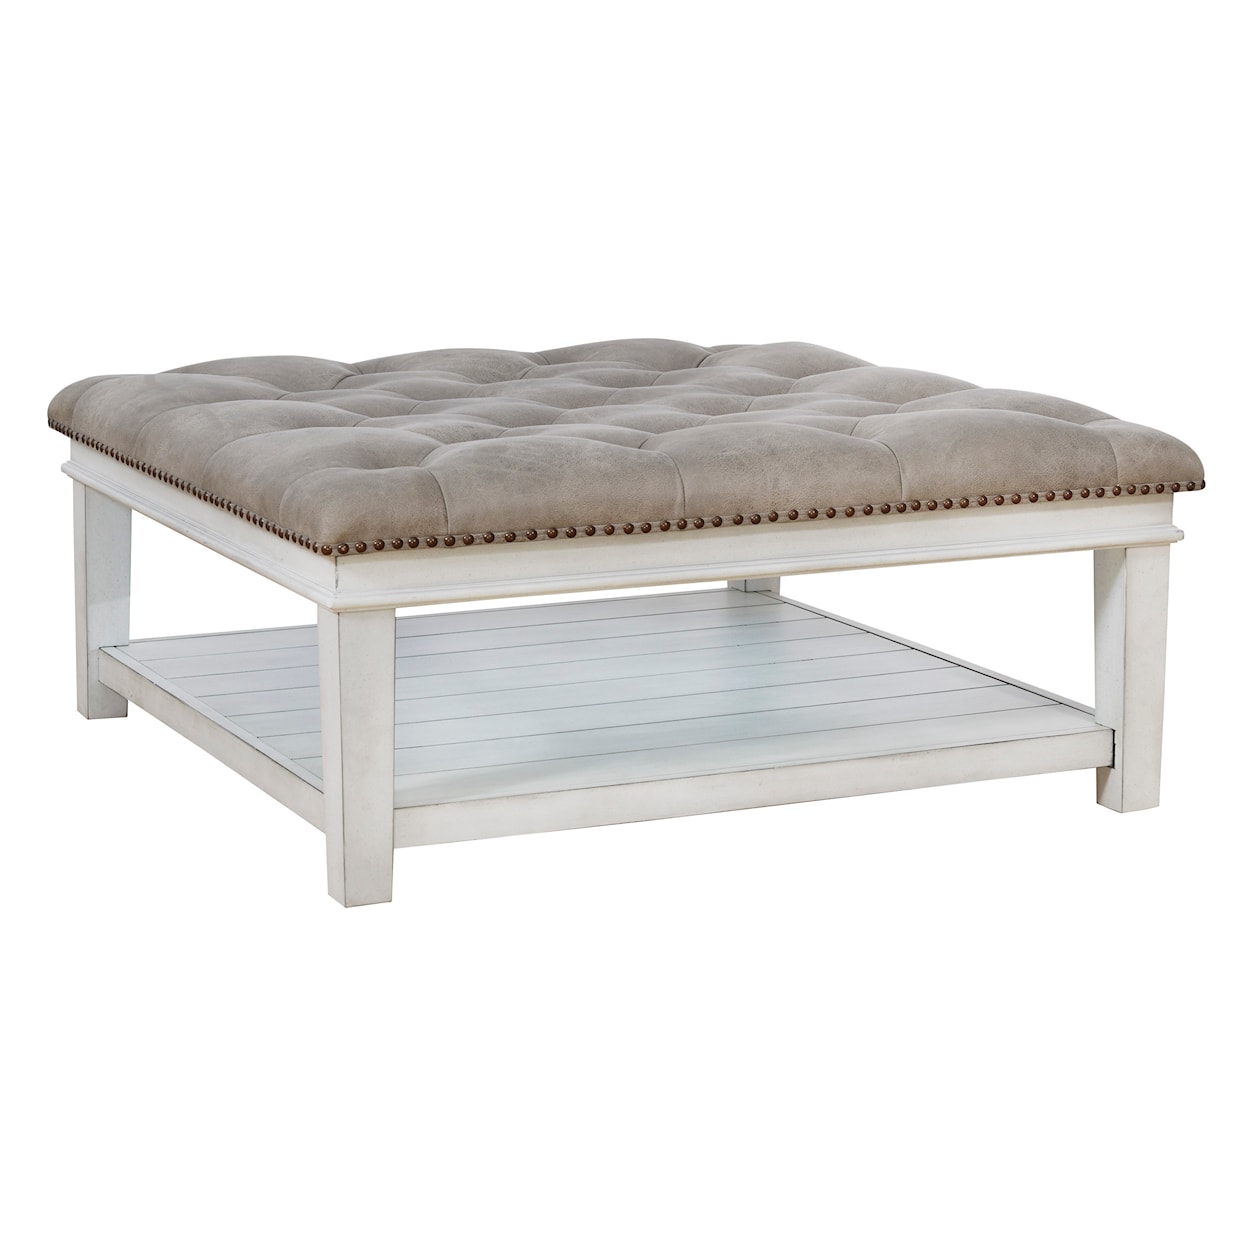 Benchcraft Kanwyn Upholstered Ottoman Coffee Table